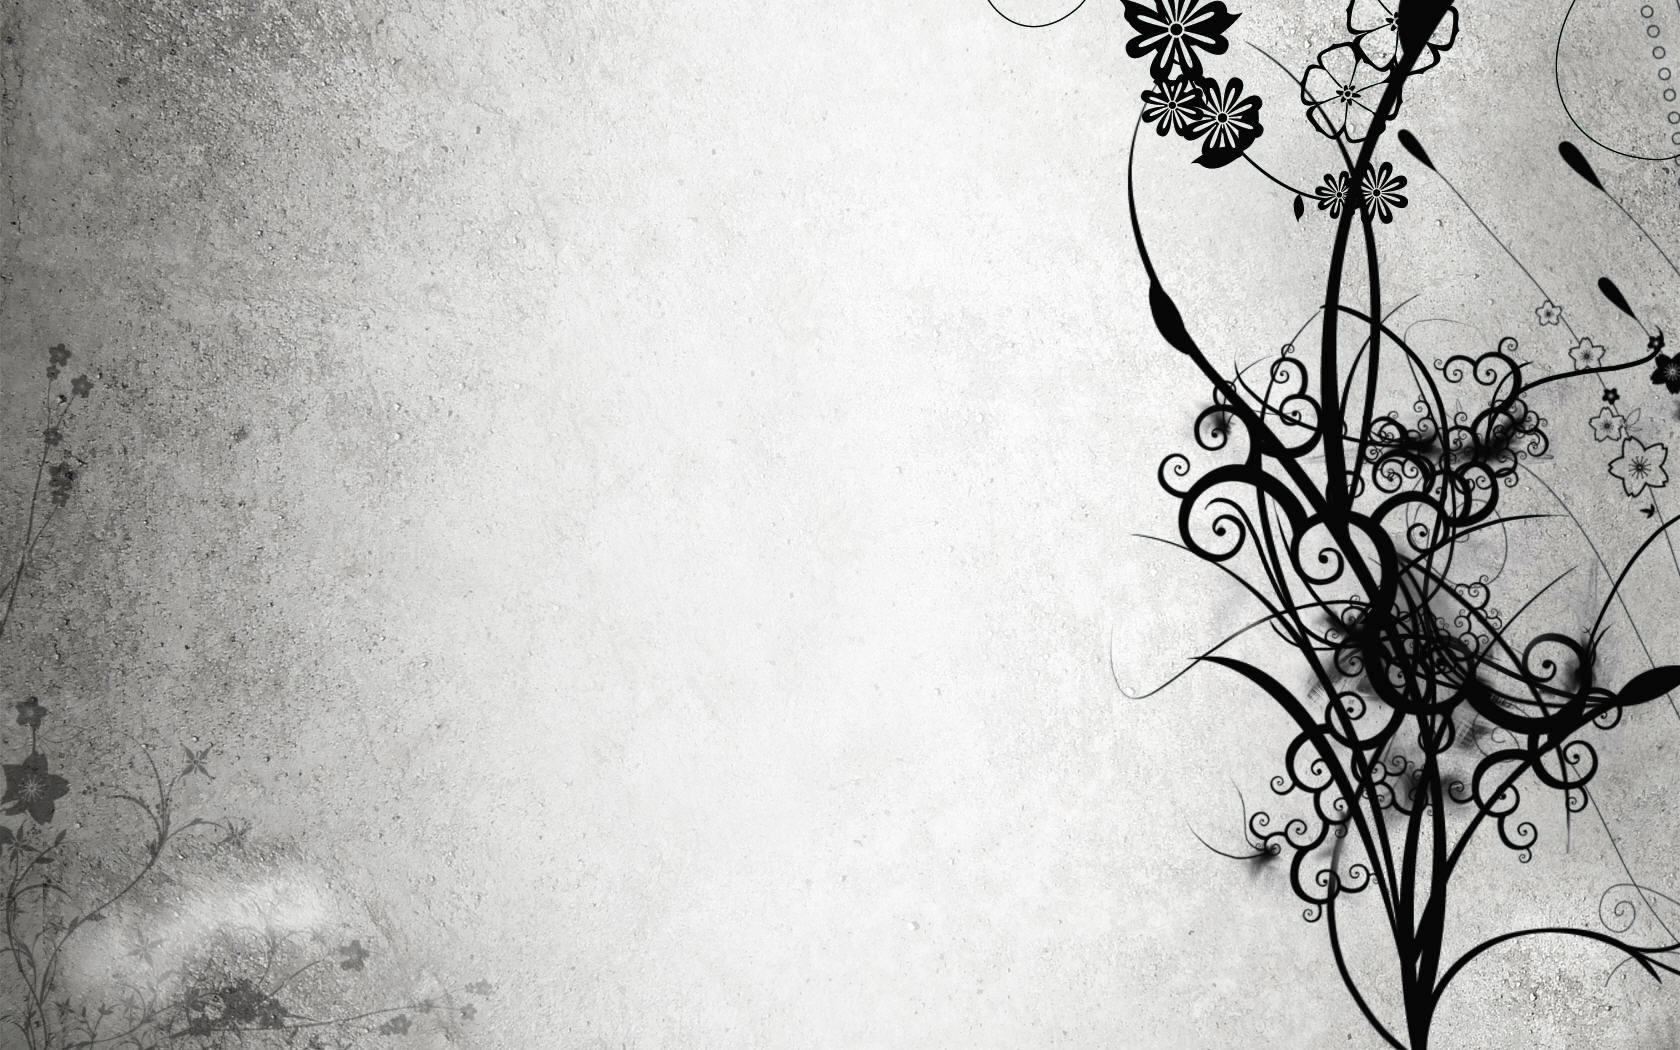 Abstract Black and White Flowers   Free Wallpapers   162